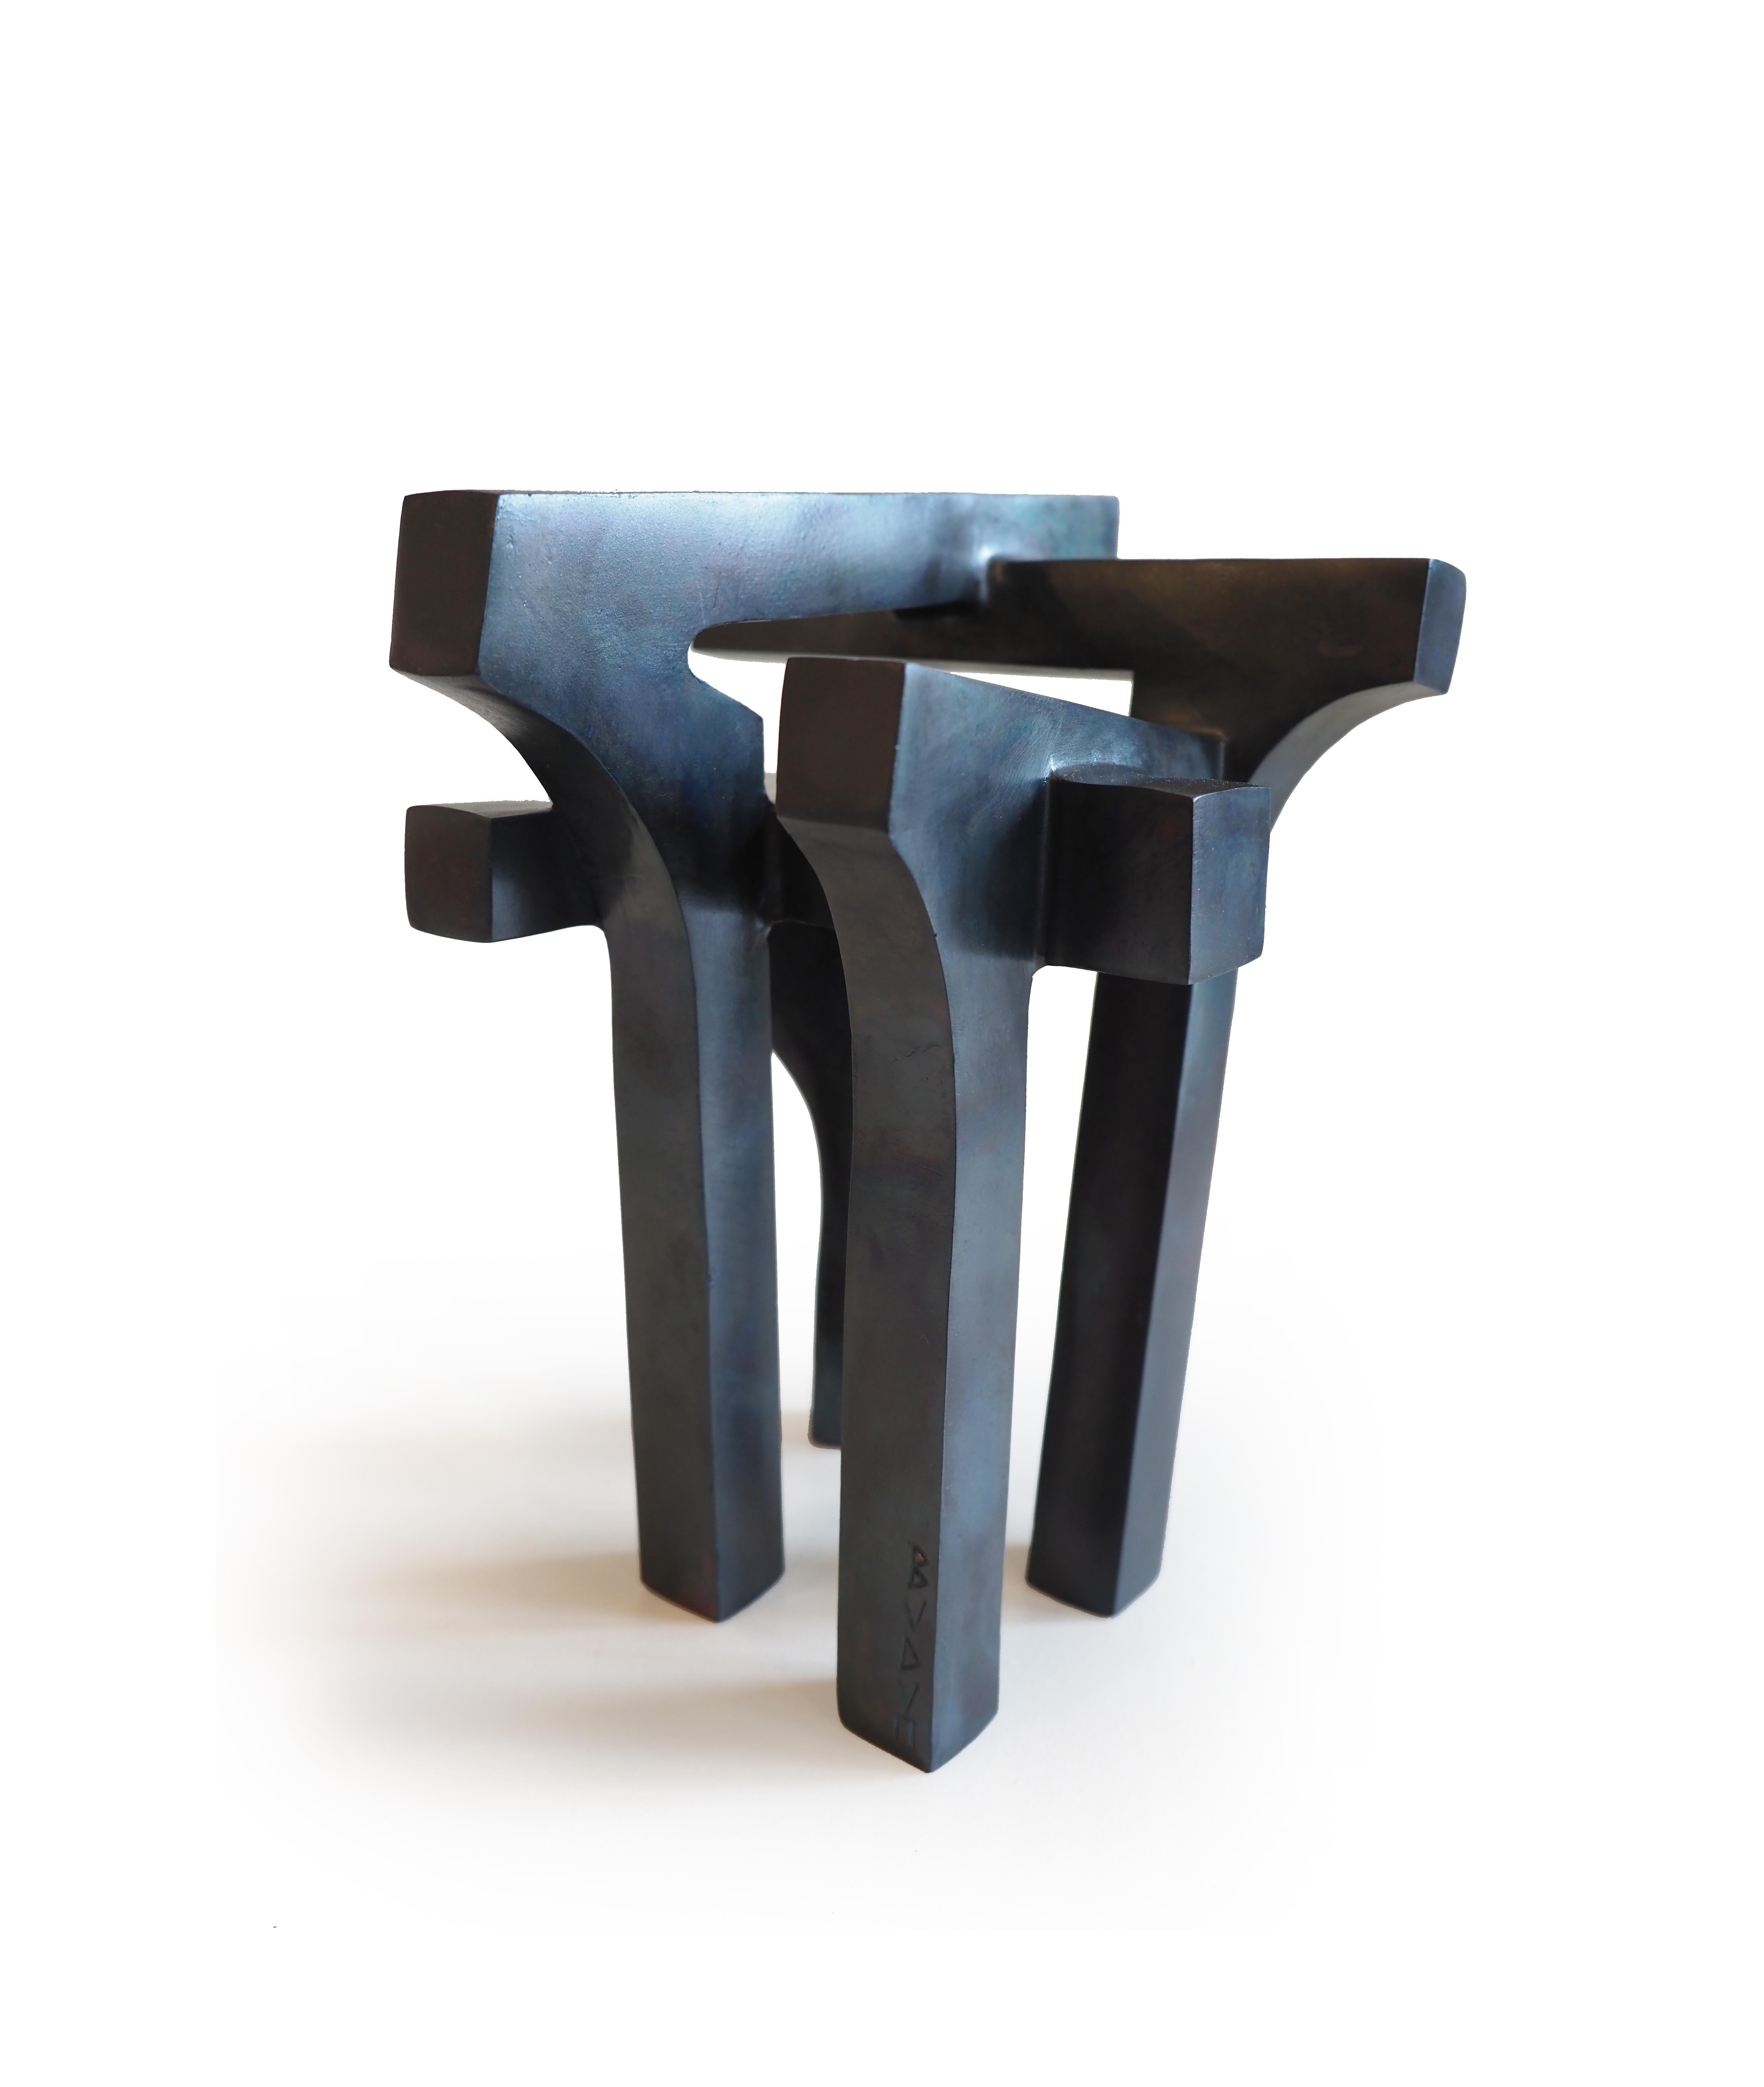 Steve Buduo Abstract Sculpture - Means of the Builder